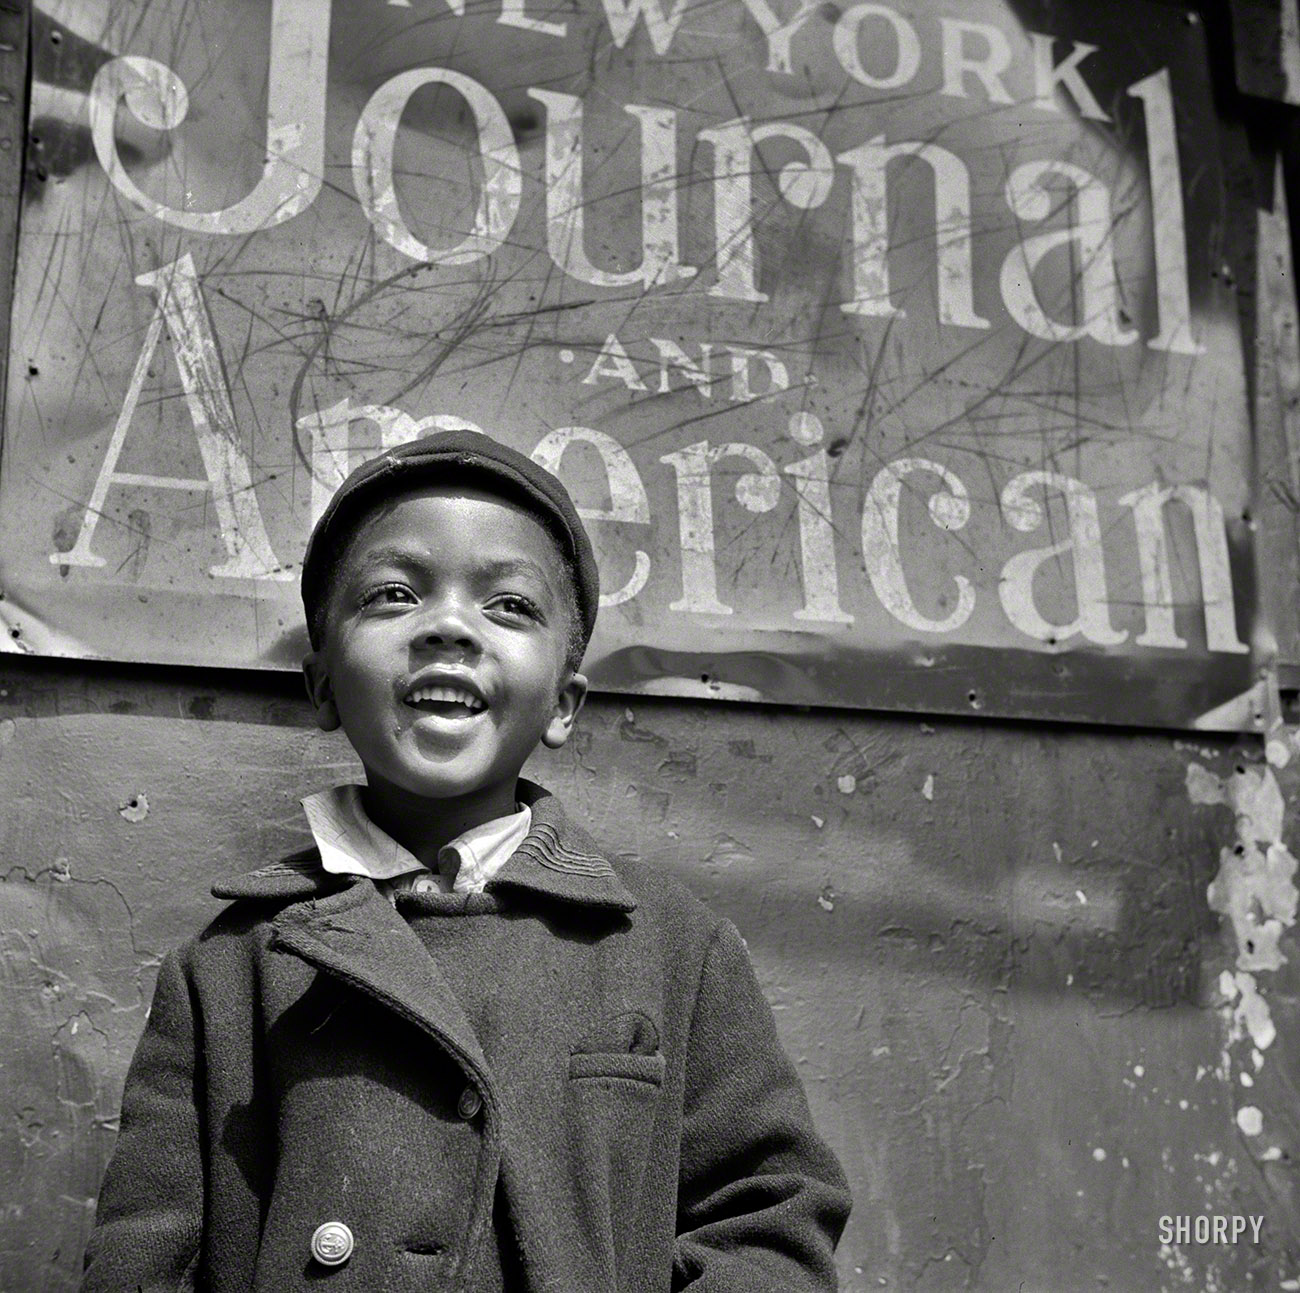 Harlem newsboy. May-June 1943. View full size. Photograph by Gordon Parks.
